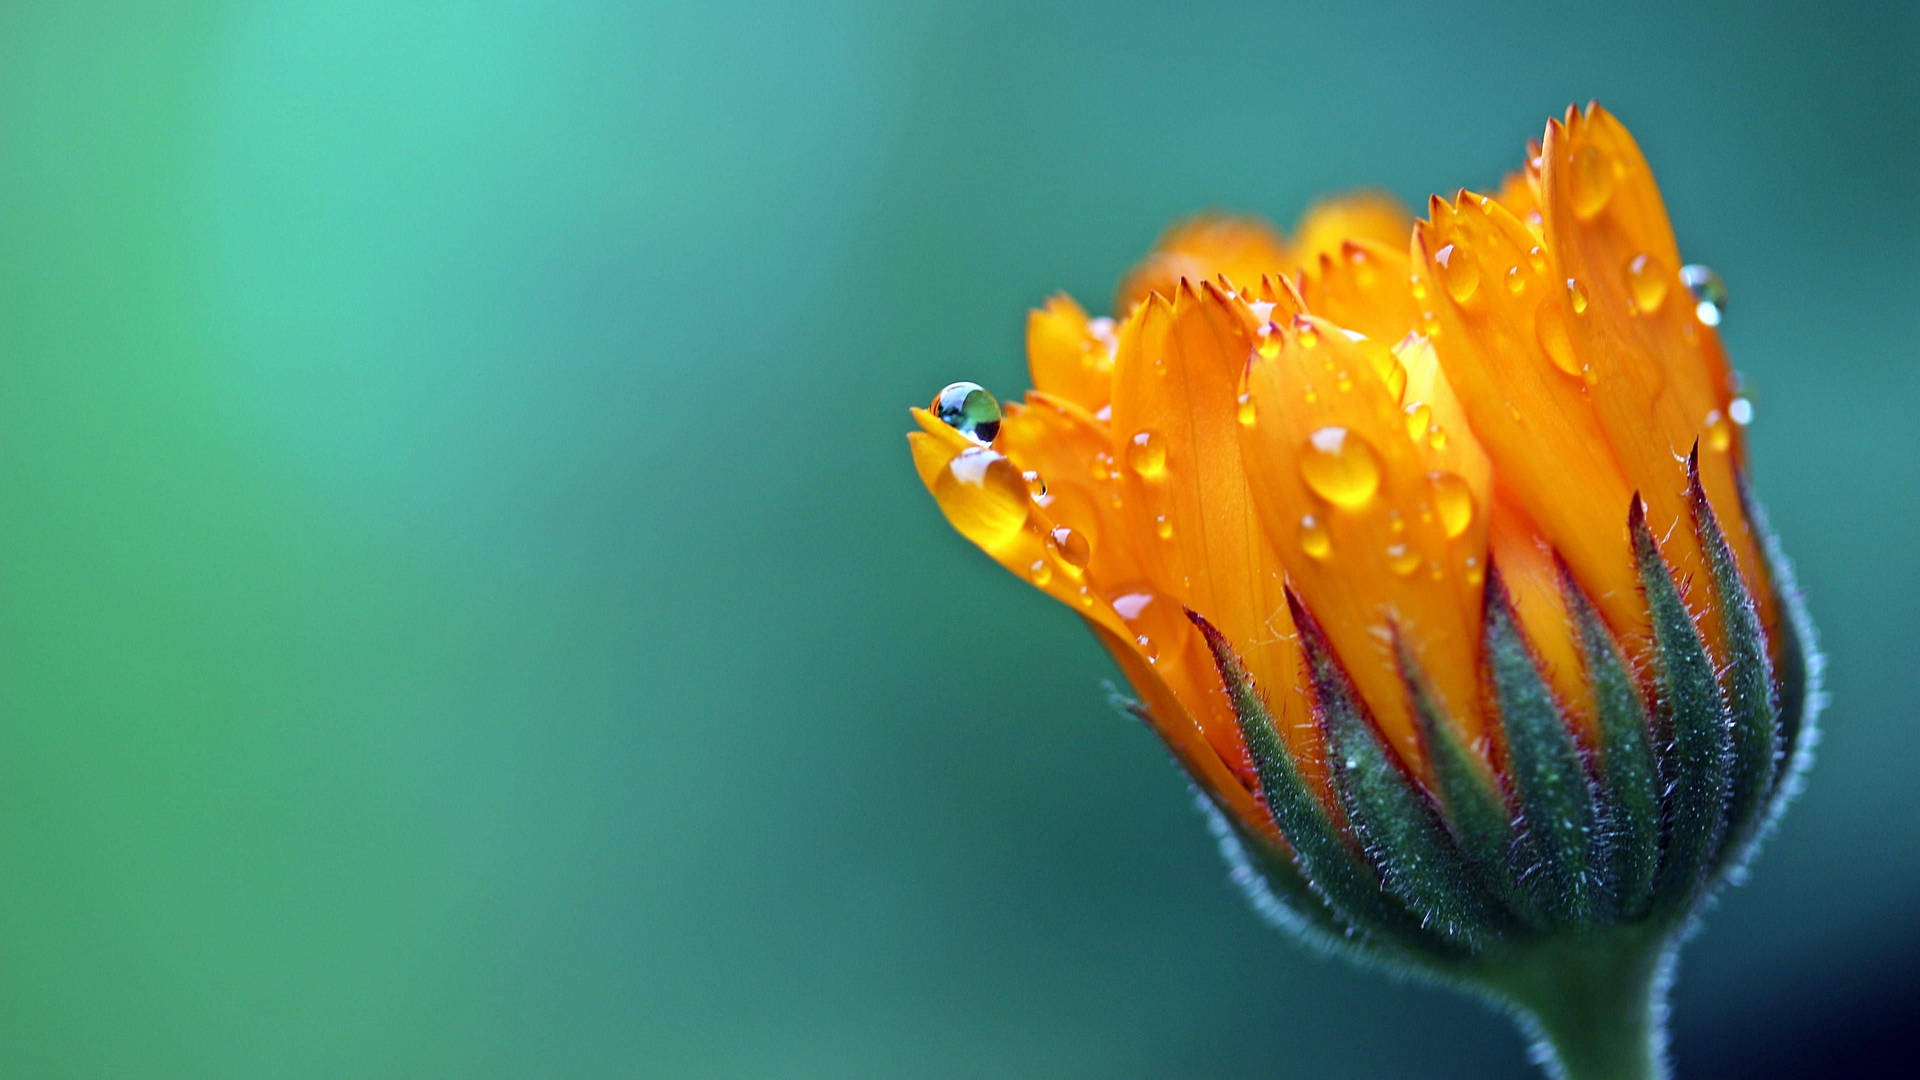 A Beautiful Marigold Flower In Macro Photgraphy Background